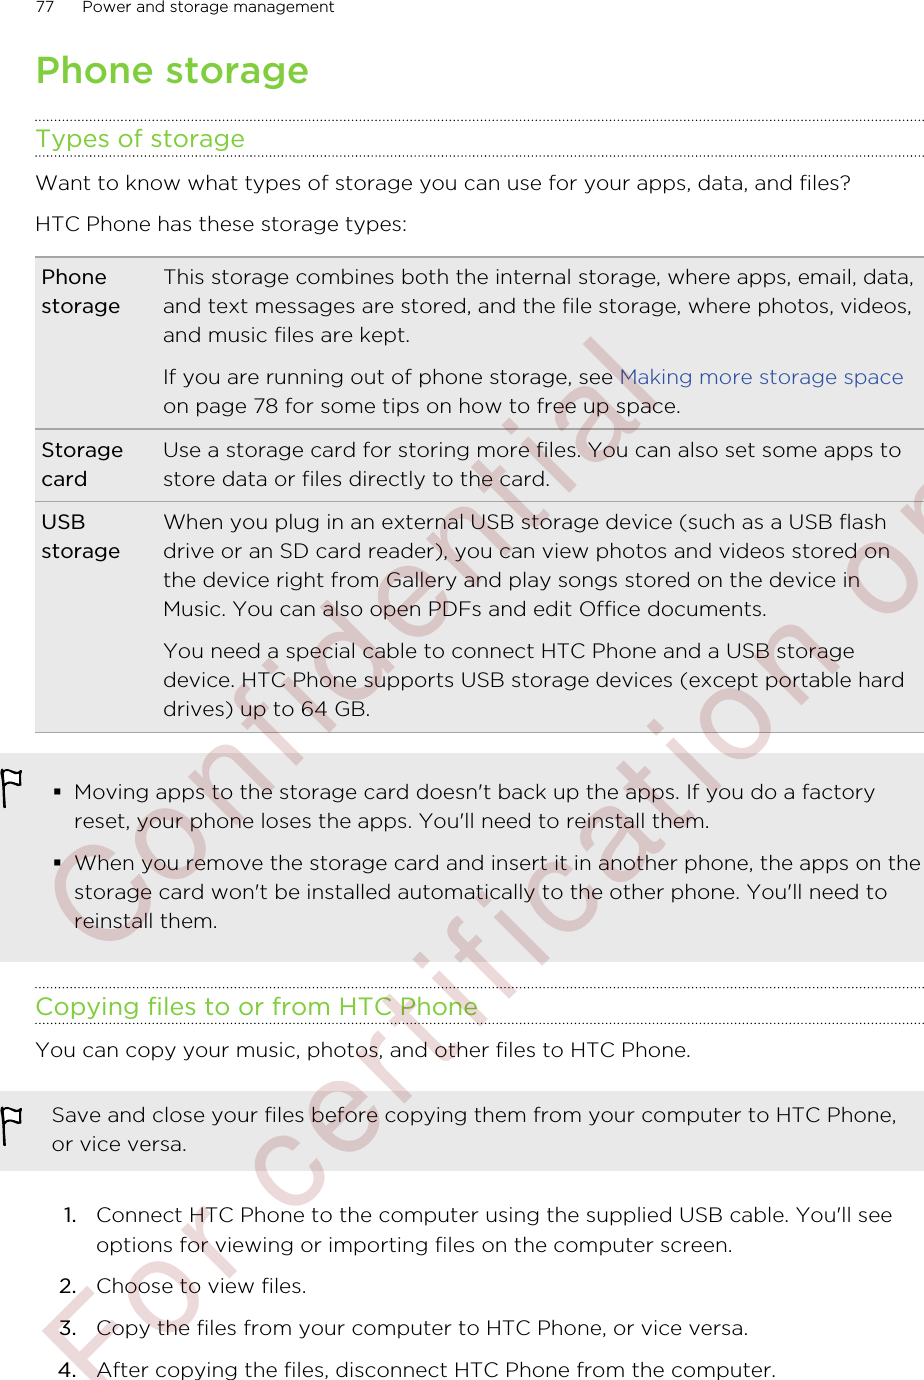 Phone storageTypes of storageWant to know what types of storage you can use for your apps, data, and files?HTC Phone has these storage types:PhonestorageThis storage combines both the internal storage, where apps, email, data,and text messages are stored, and the file storage, where photos, videos,and music files are kept.If you are running out of phone storage, see Making more storage spaceon page 78 for some tips on how to free up space.StoragecardUse a storage card for storing more files. You can also set some apps tostore data or files directly to the card.USBstorageWhen you plug in an external USB storage device (such as a USB flashdrive or an SD card reader), you can view photos and videos stored onthe device right from Gallery and play songs stored on the device inMusic. You can also open PDFs and edit Office documents.You need a special cable to connect HTC Phone and a USB storagedevice. HTC Phone supports USB storage devices (except portable harddrives) up to 64 GB.§Moving apps to the storage card doesn&apos;t back up the apps. If you do a factoryreset, your phone loses the apps. You&apos;ll need to reinstall them.§When you remove the storage card and insert it in another phone, the apps on thestorage card won&apos;t be installed automatically to the other phone. You&apos;ll need toreinstall them.Copying files to or from HTC PhoneYou can copy your music, photos, and other files to HTC Phone.Save and close your files before copying them from your computer to HTC Phone,or vice versa.1. Connect HTC Phone to the computer using the supplied USB cable. You&apos;ll seeoptions for viewing or importing files on the computer screen.2. Choose to view files.3. Copy the files from your computer to HTC Phone, or vice versa.4. After copying the files, disconnect HTC Phone from the computer.77 Power and storage management        Confident ial  For cert ificat ion only